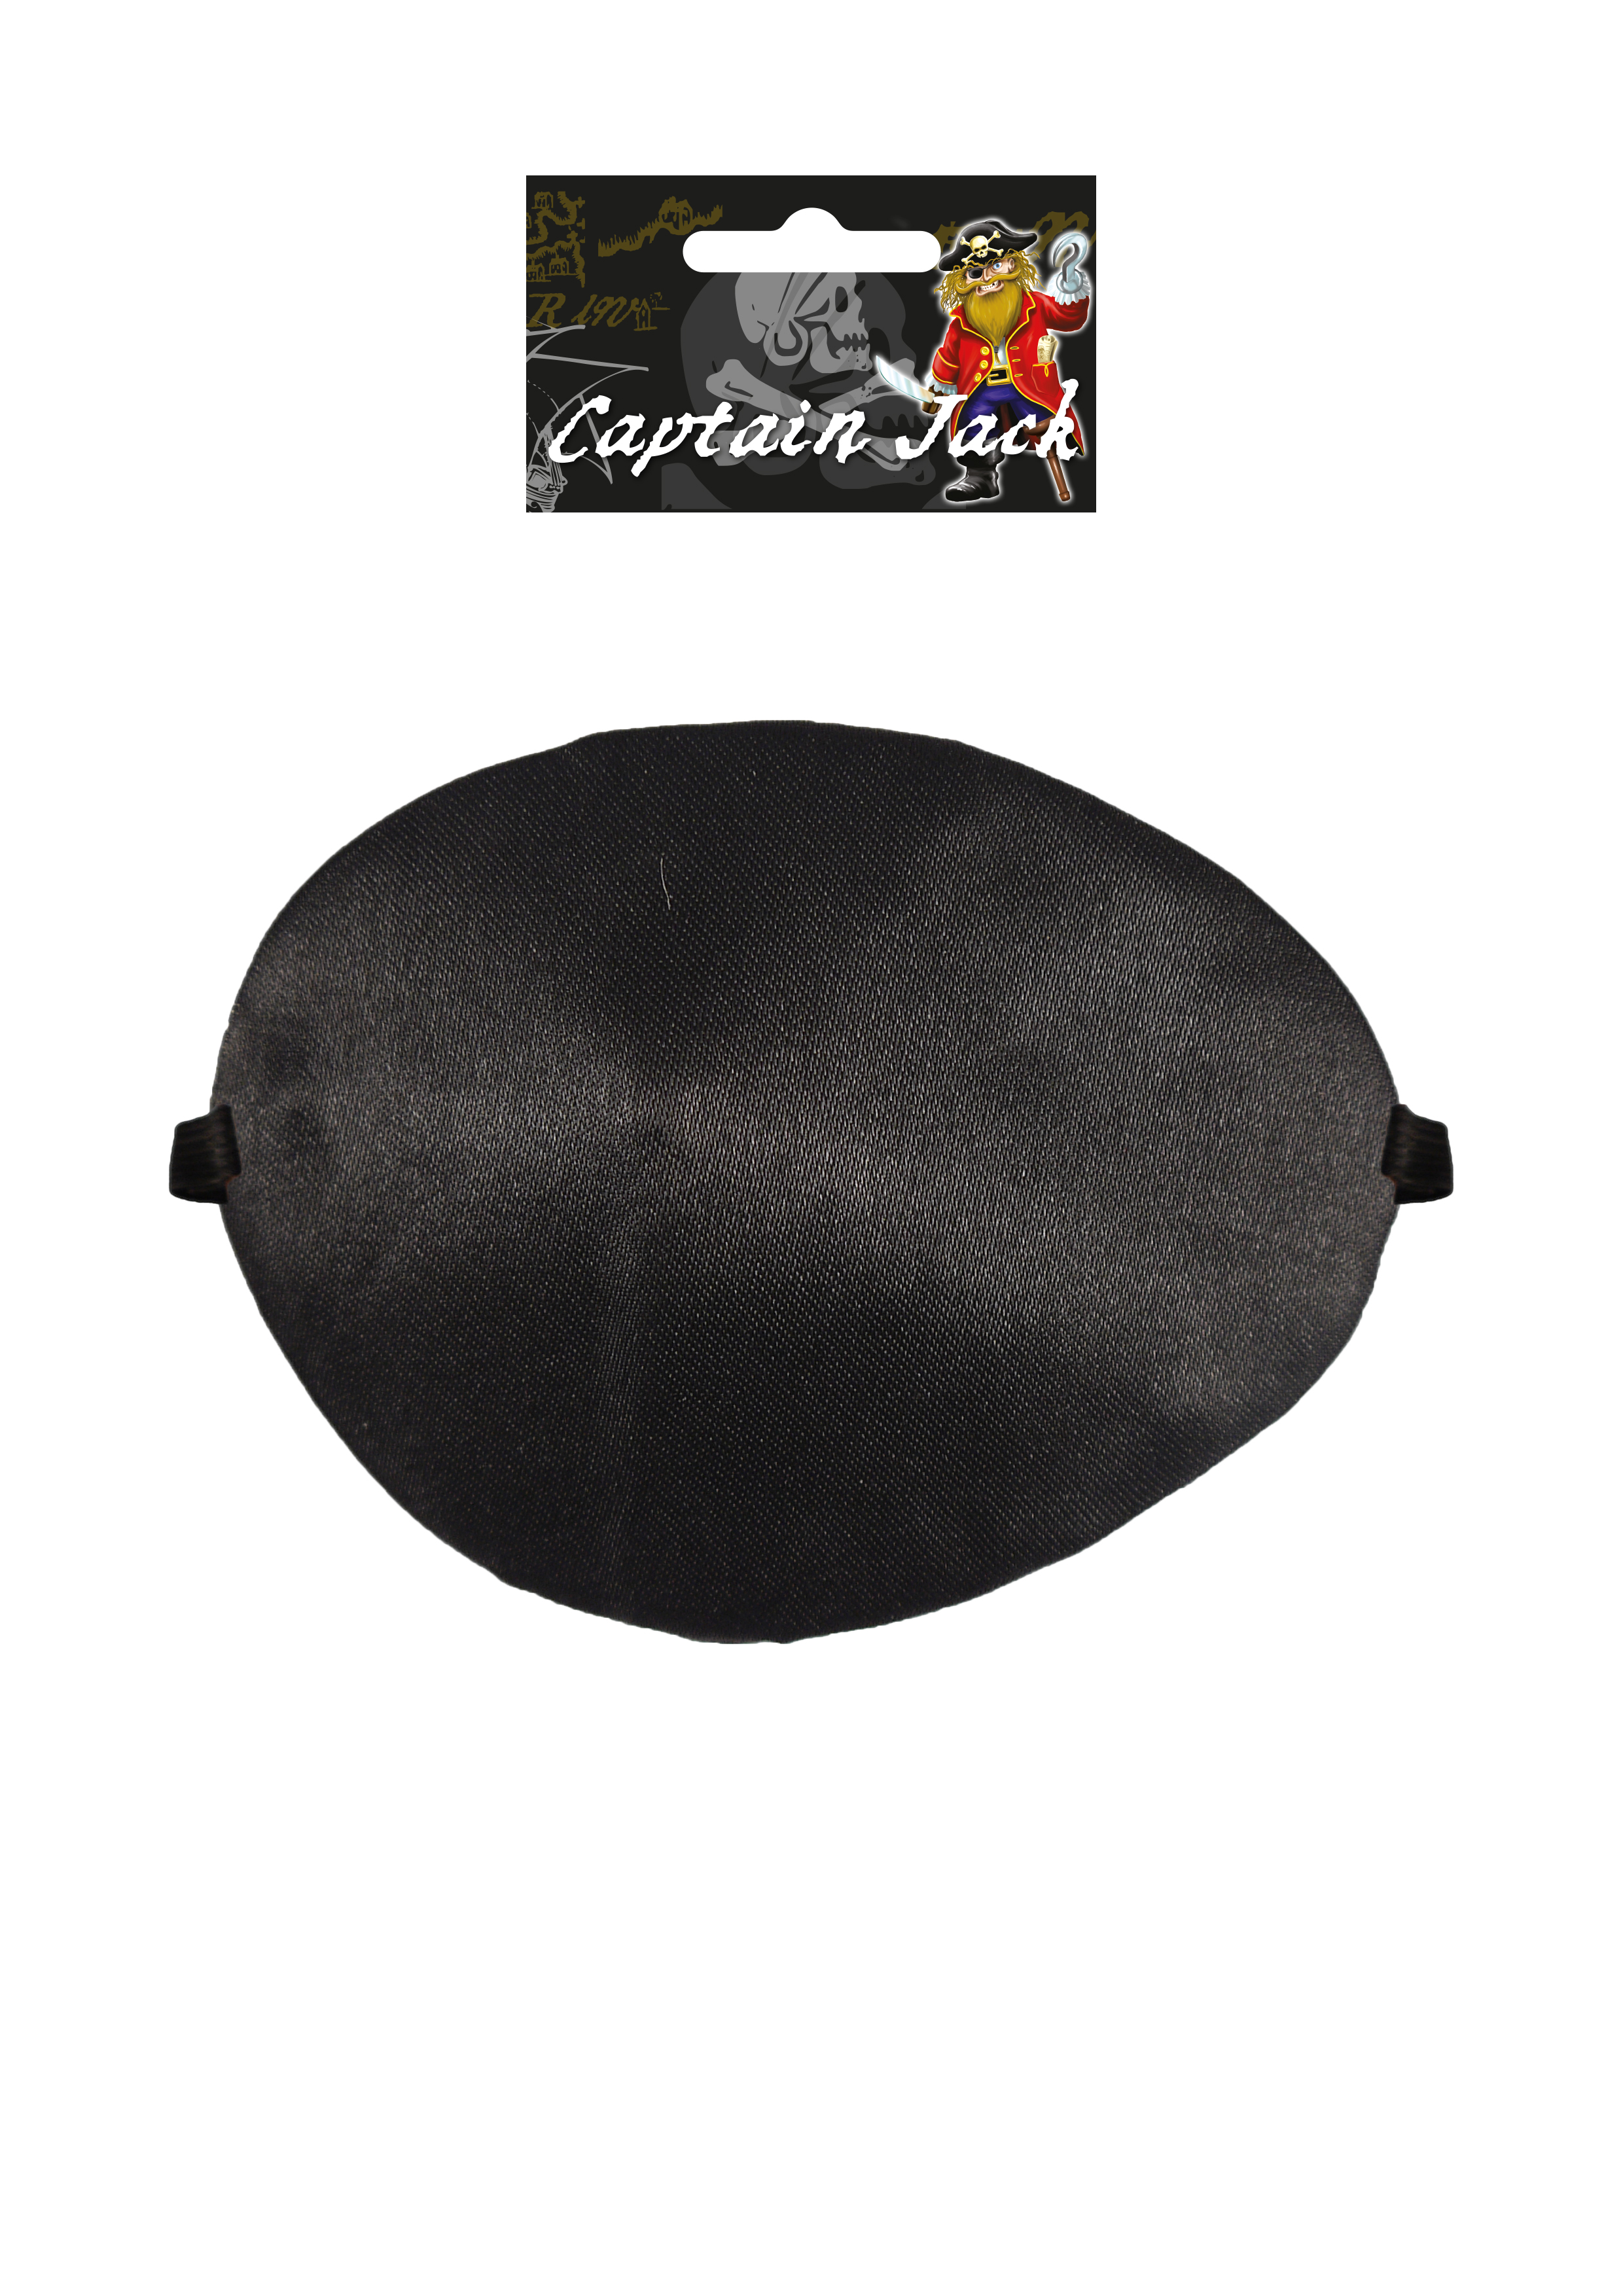 Pirate Eye Patch Adult